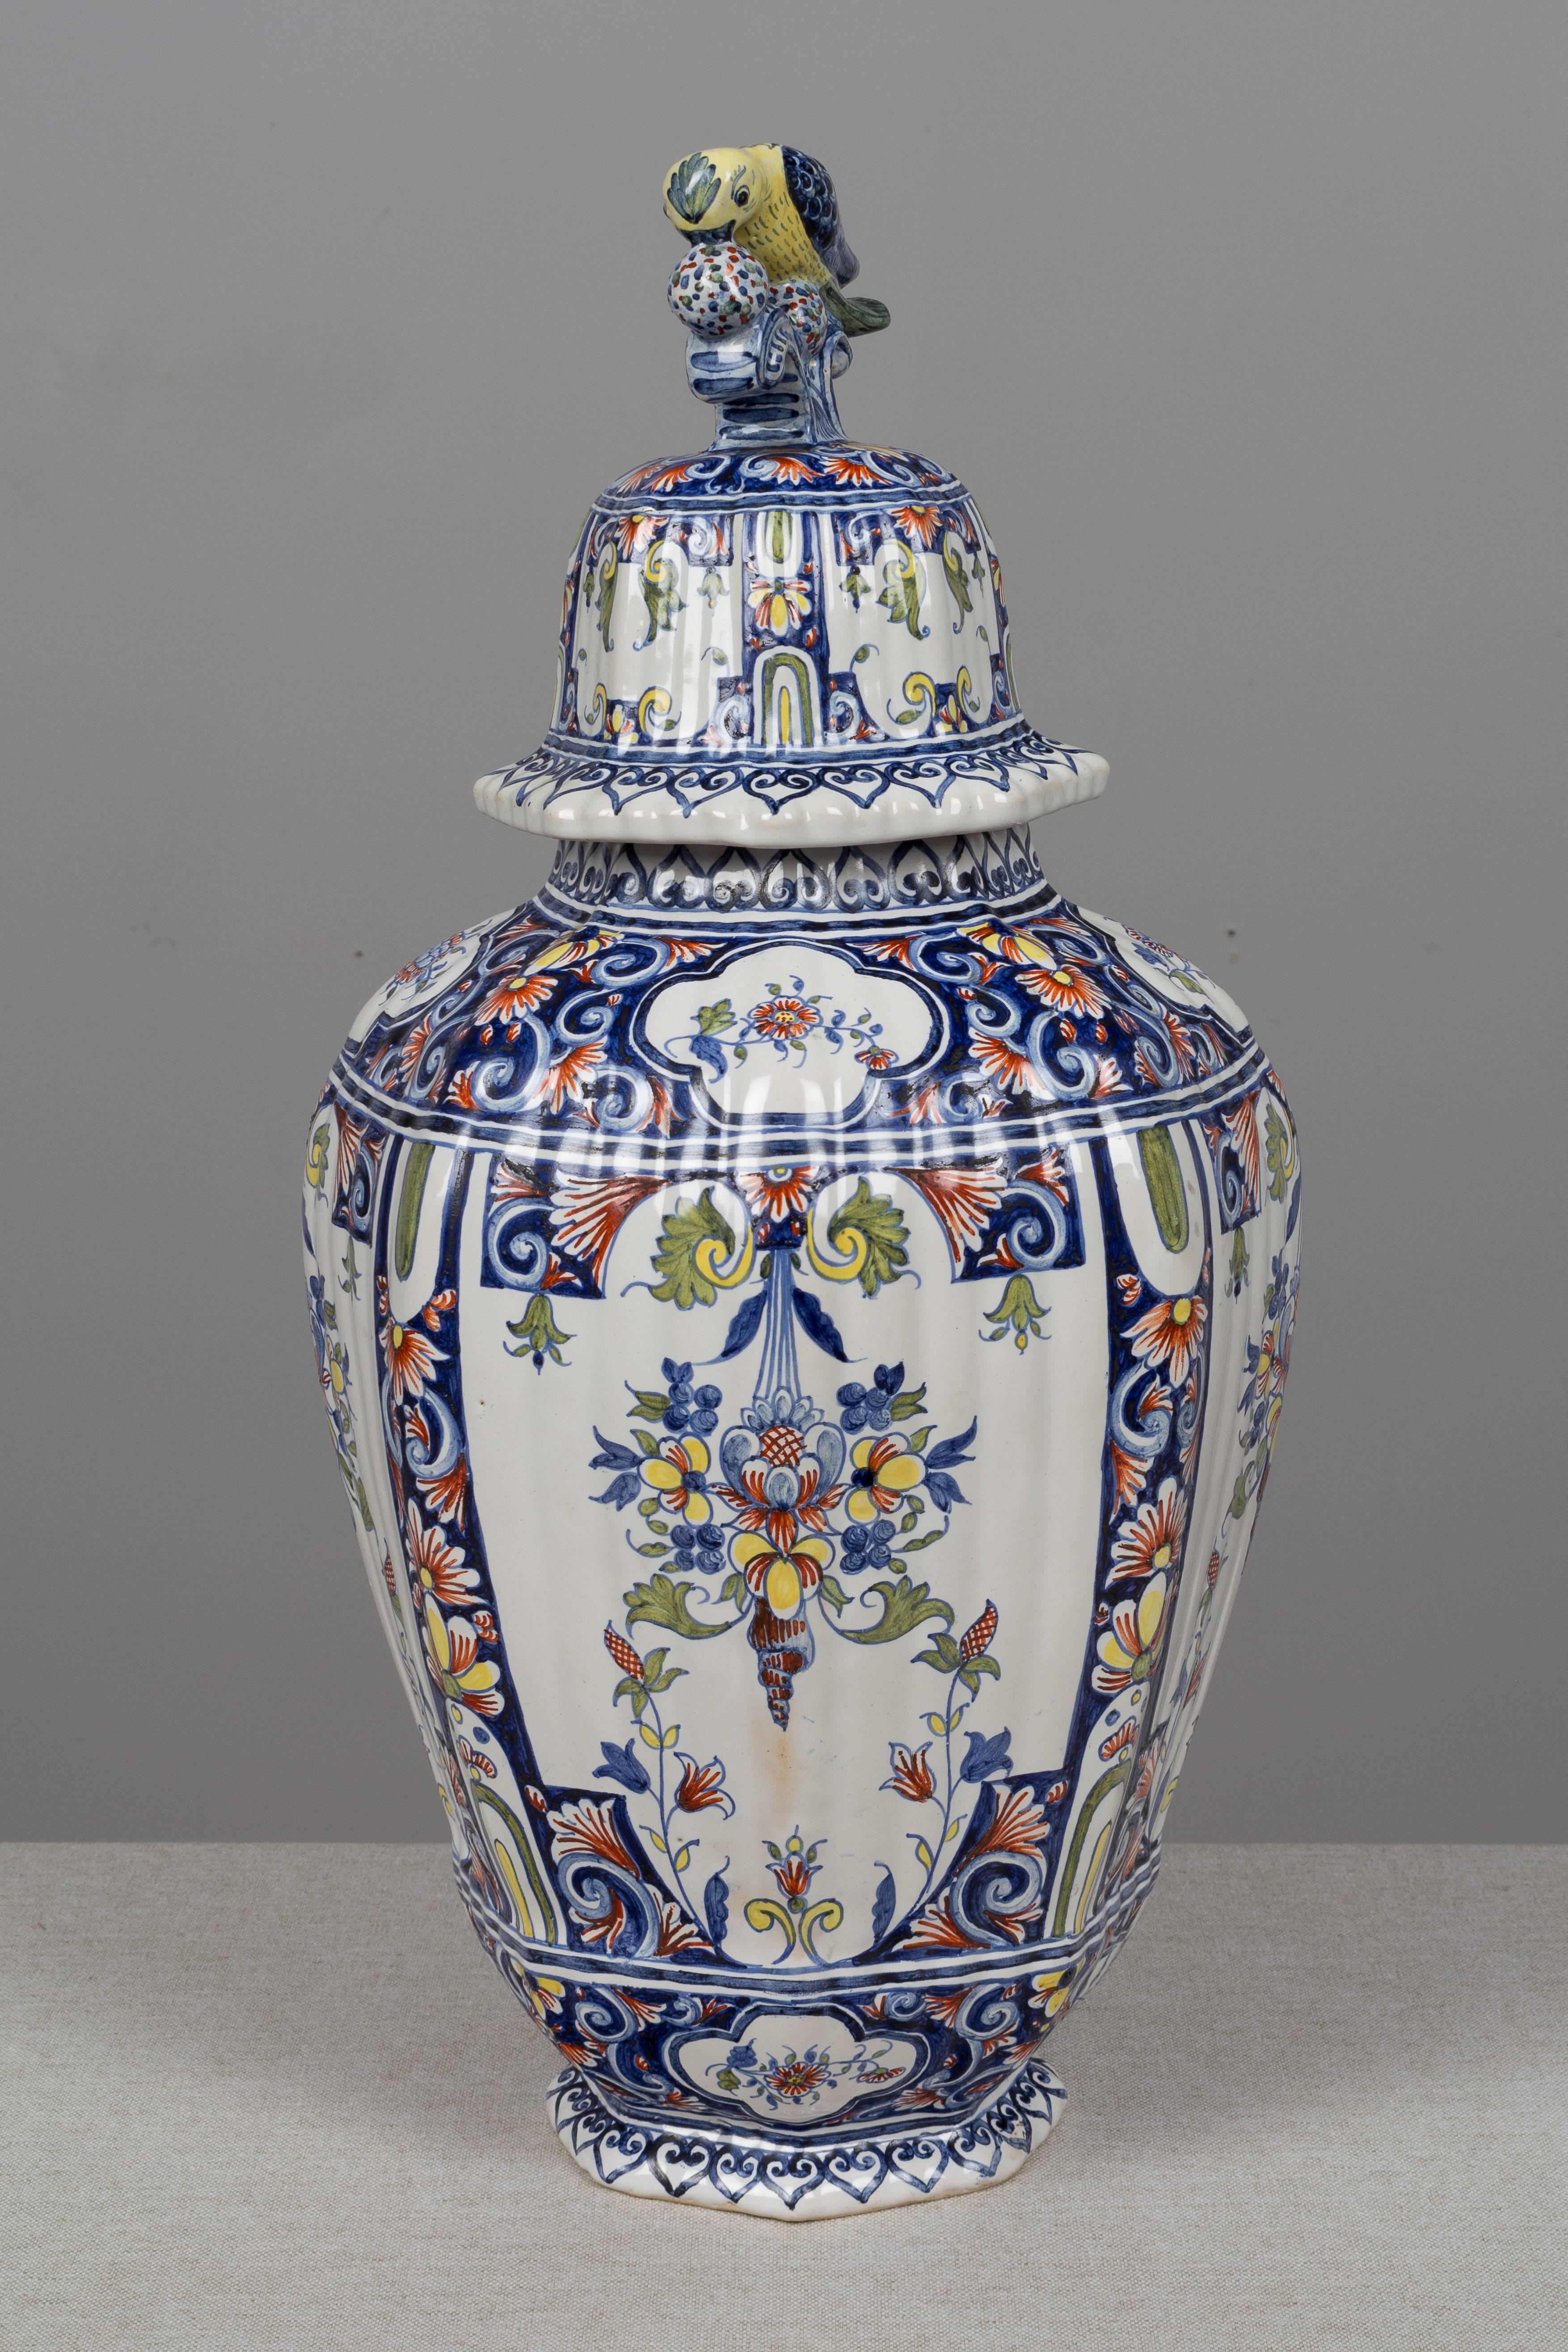 French Provincial 19th Century Delft Faience Ginger Jar